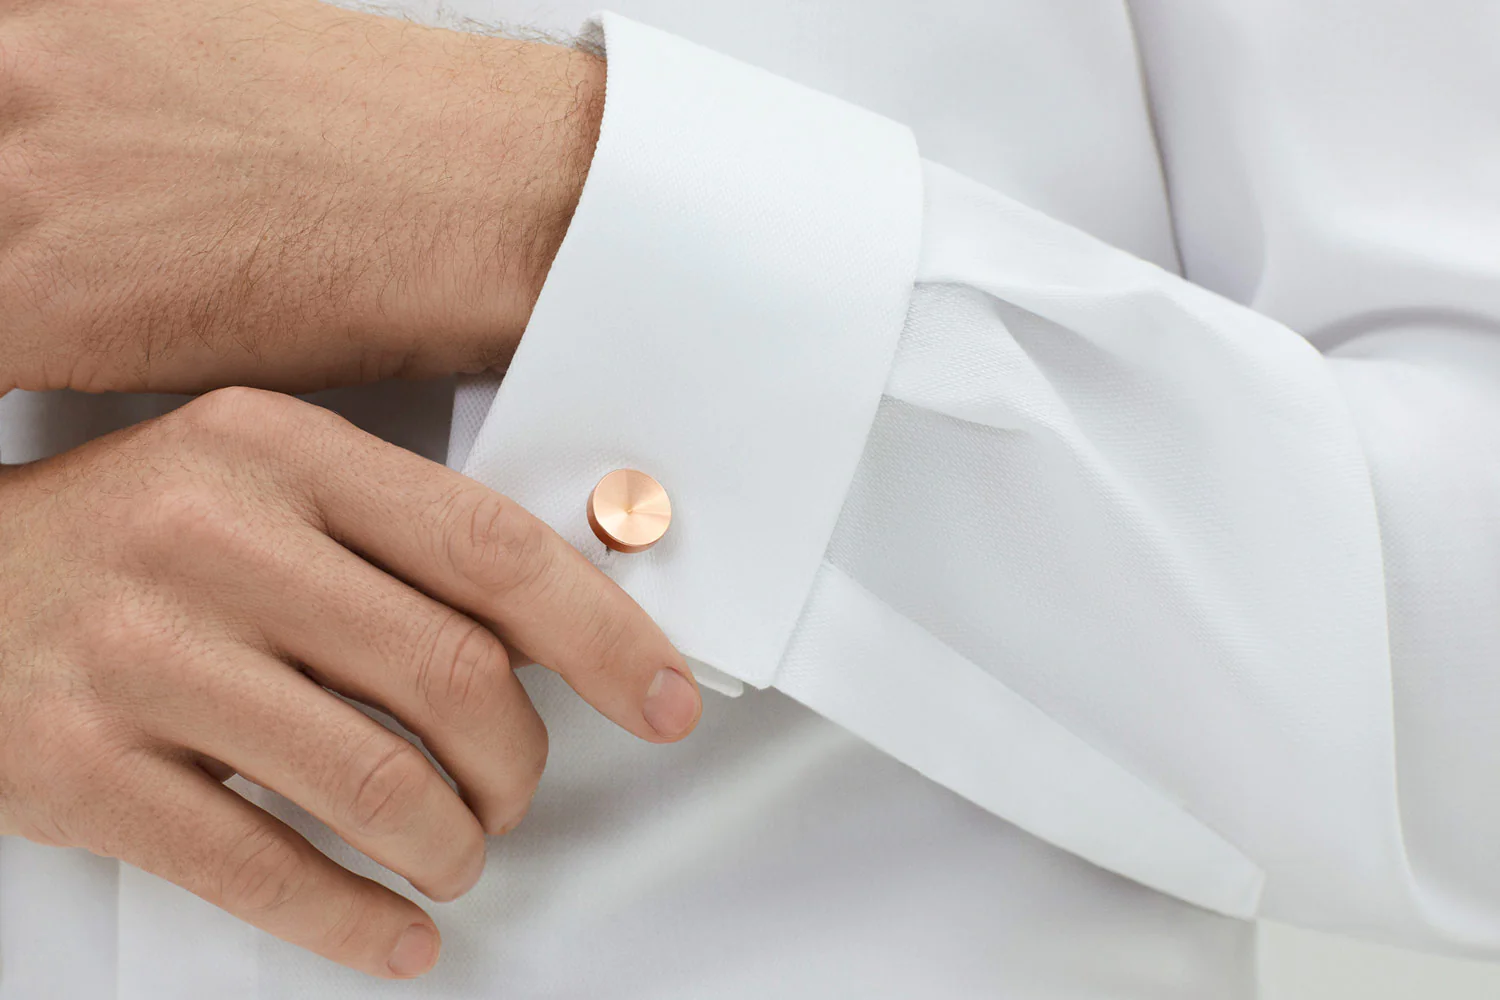 can you add cufflinks to any shirt